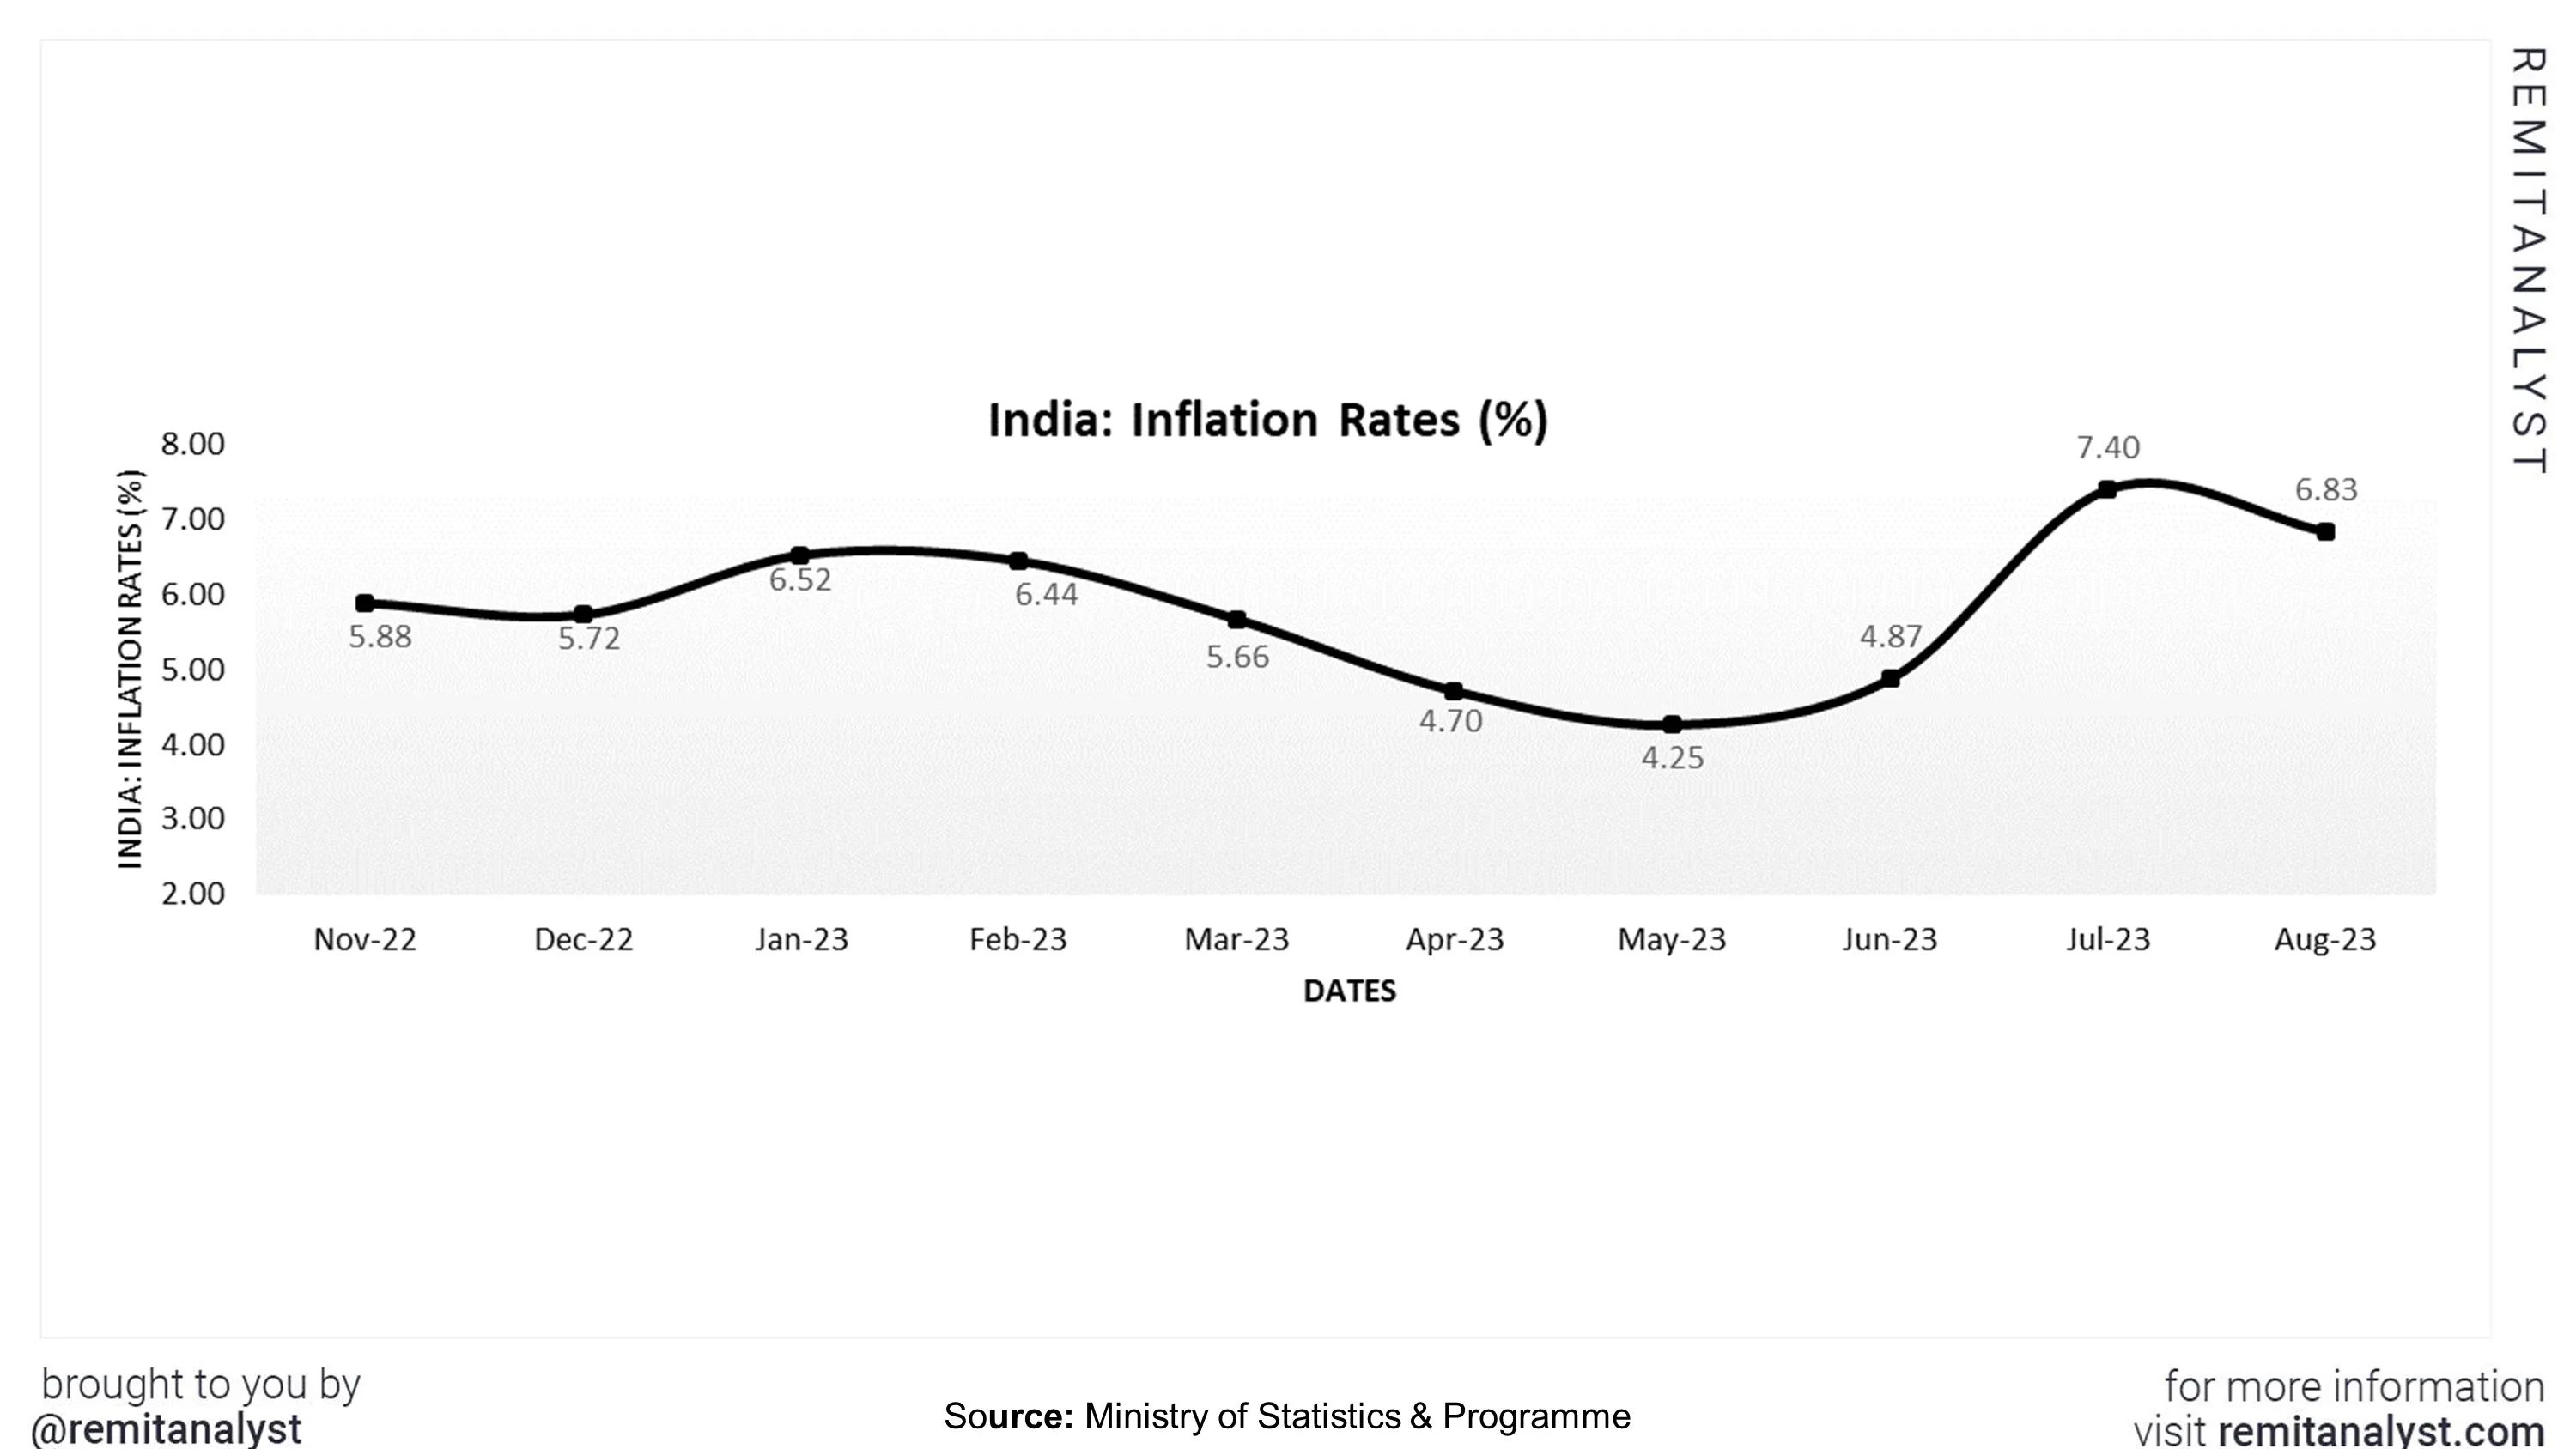 inflation-rates-india-from-nov-2022-to-aug-2023